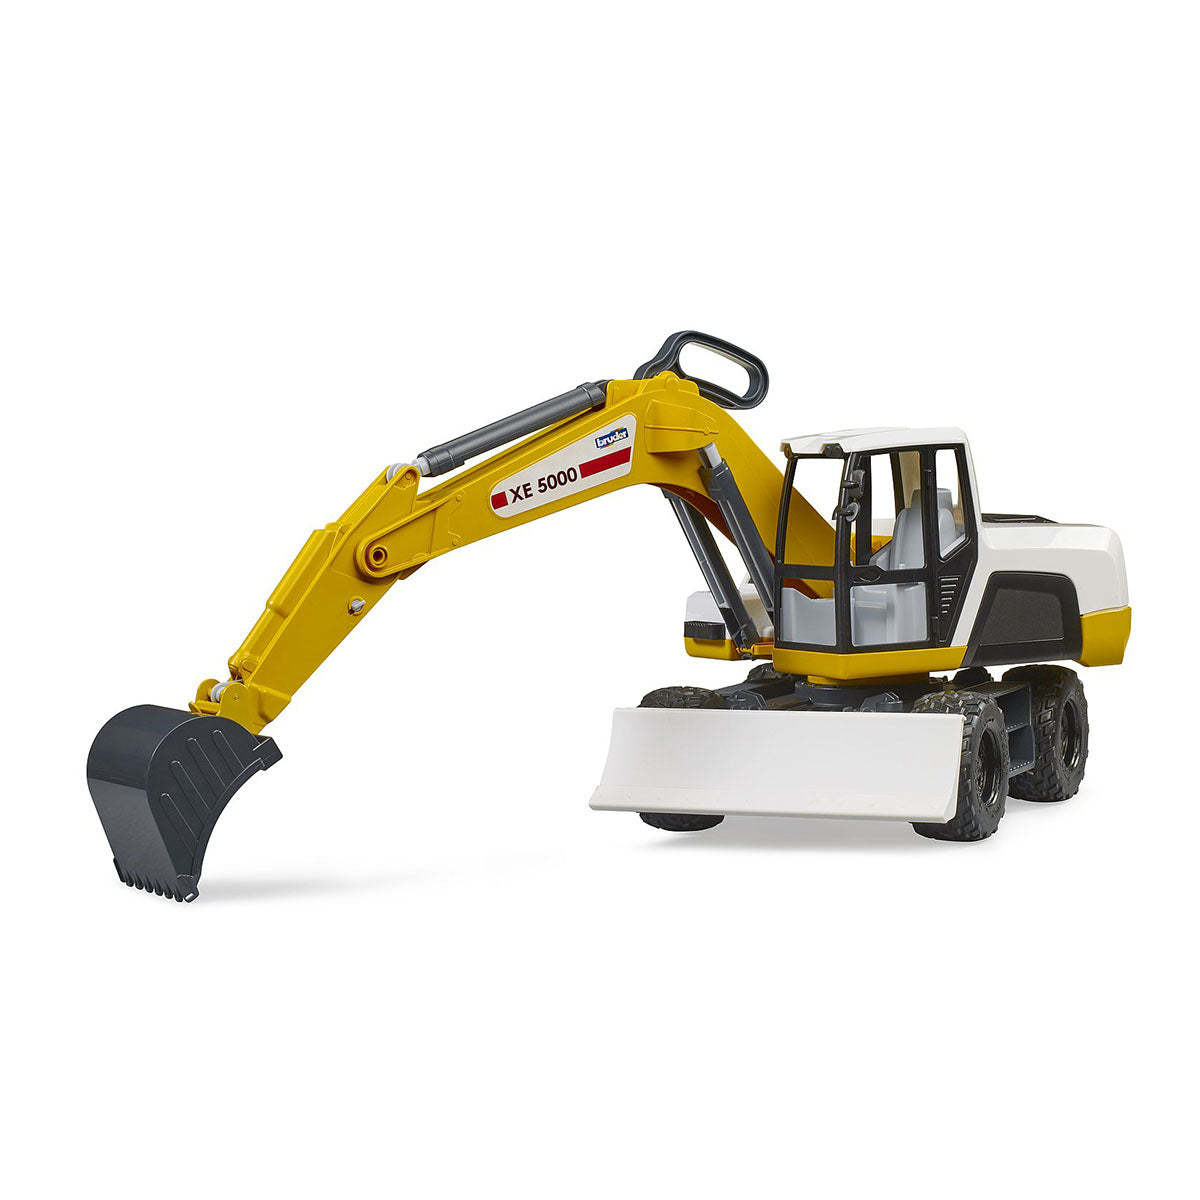 Roadmax excavator construction toy with arm stretched out prepared to excavate.